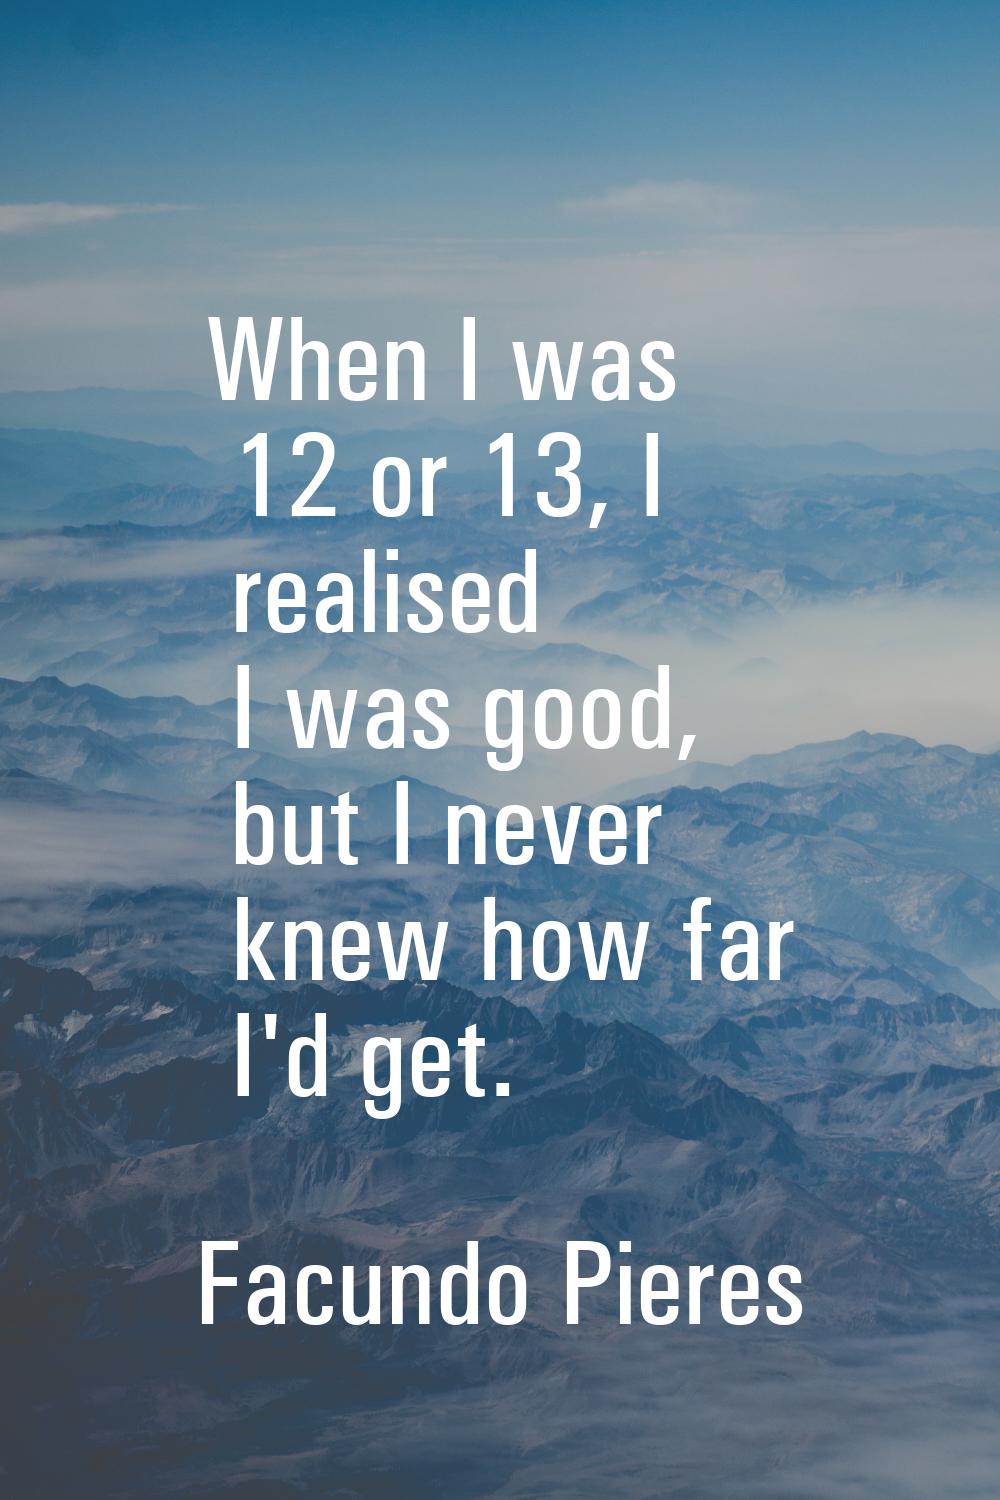 When I was 12 or 13, I realised I was good, but I never knew how far I'd get.